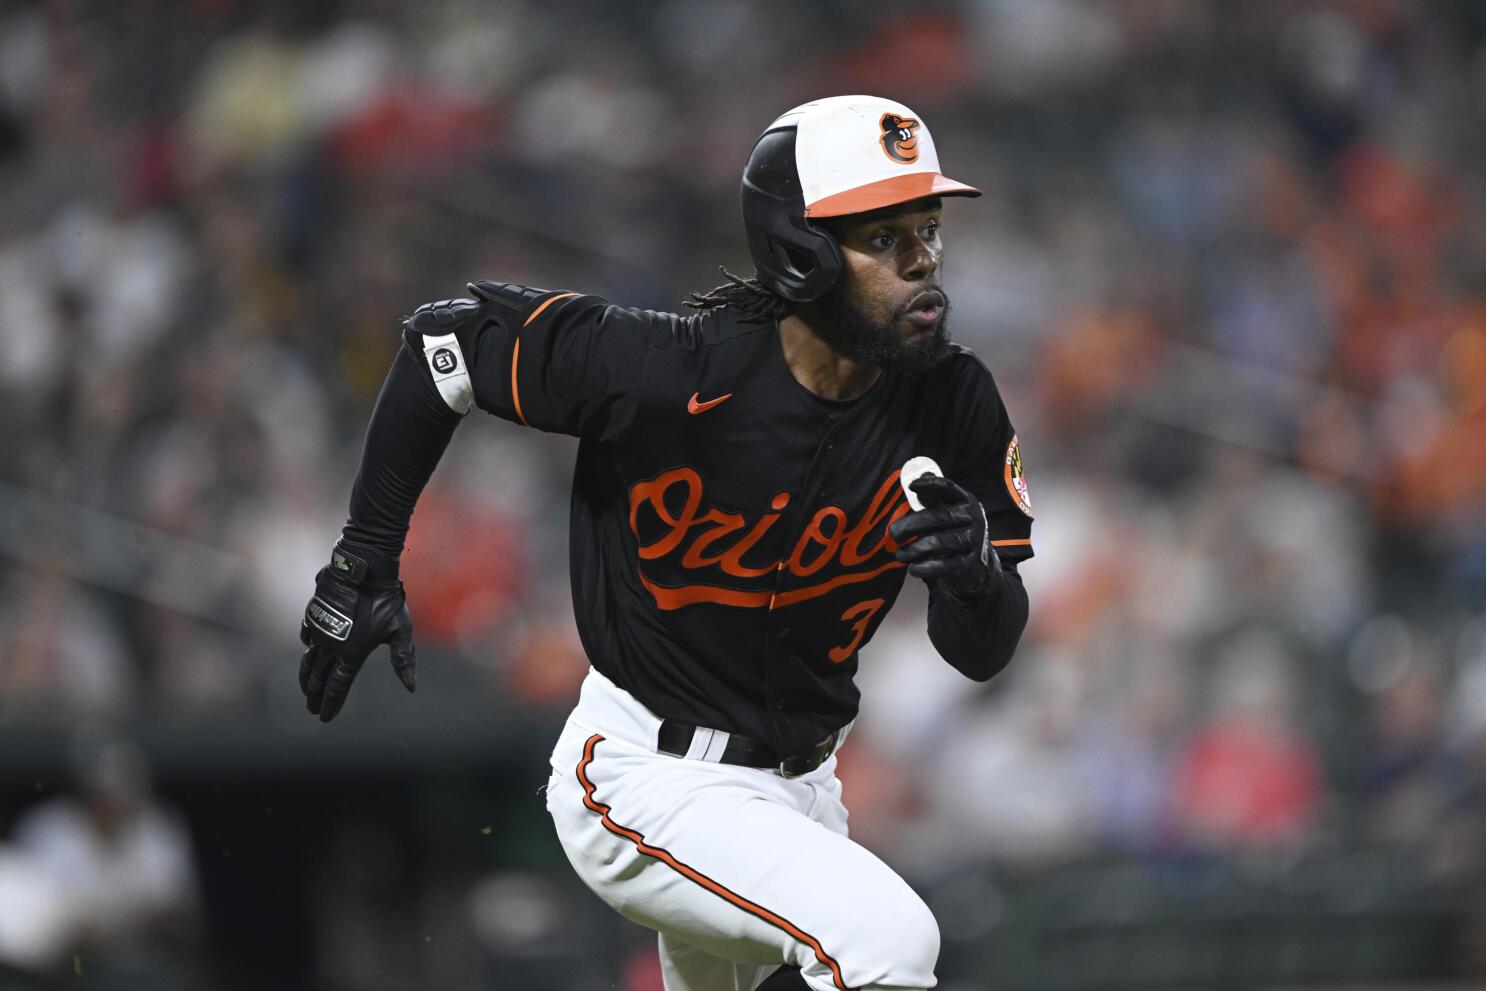 Cedric Mullins hits for the cycle as Orioles beat Pirates 6-3